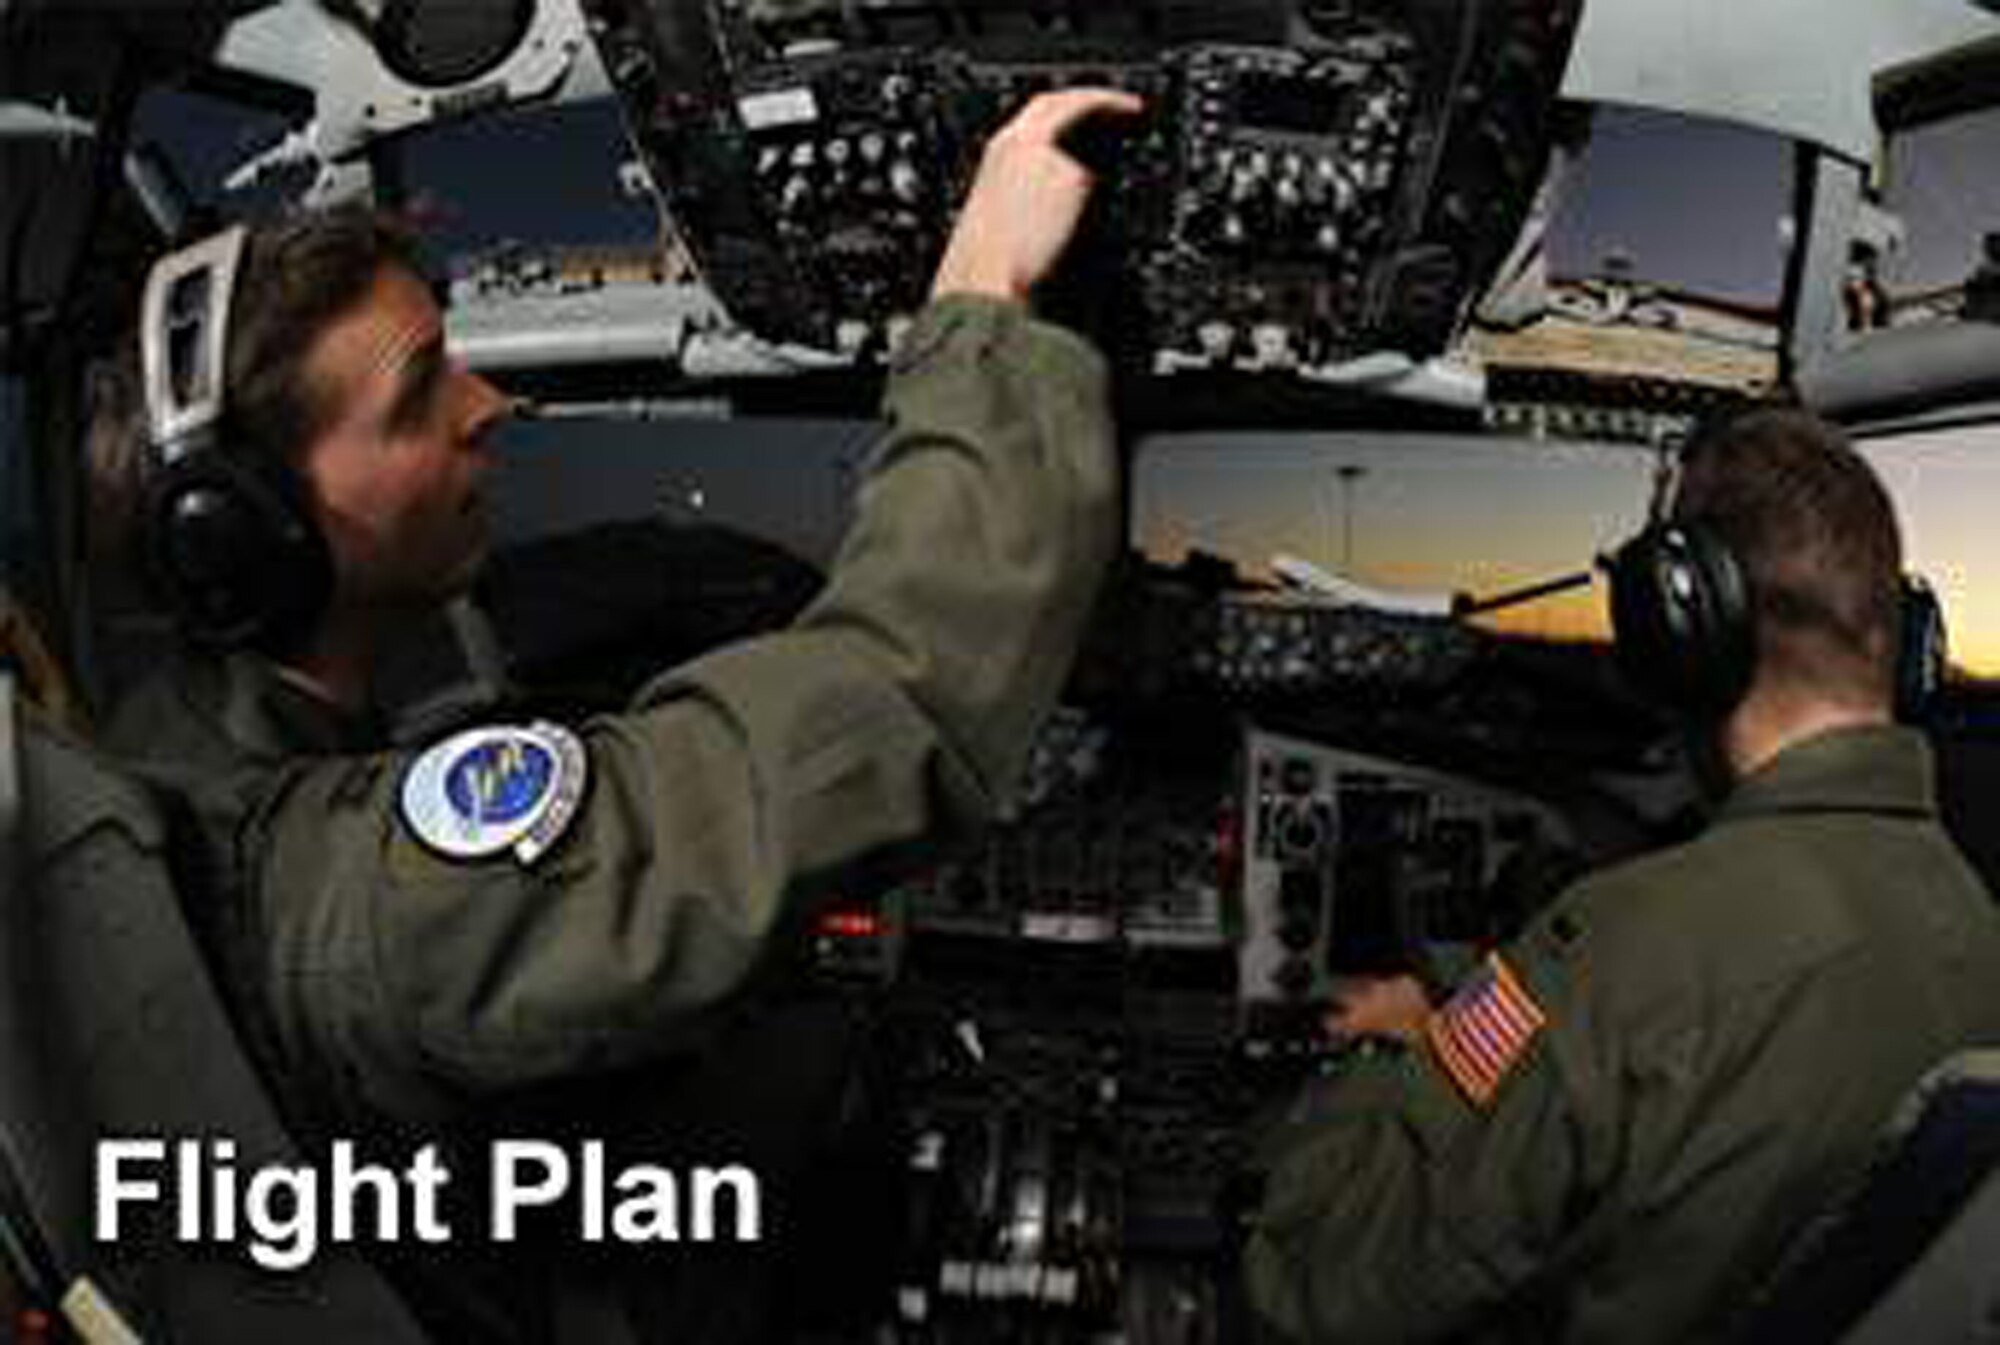 Air Force officials made tough choices and some prudent trade-offs to balance the service across the spectrum of capabilities needed for the future, Air Force leaders said. (U.S. Air Force photo illustration)
